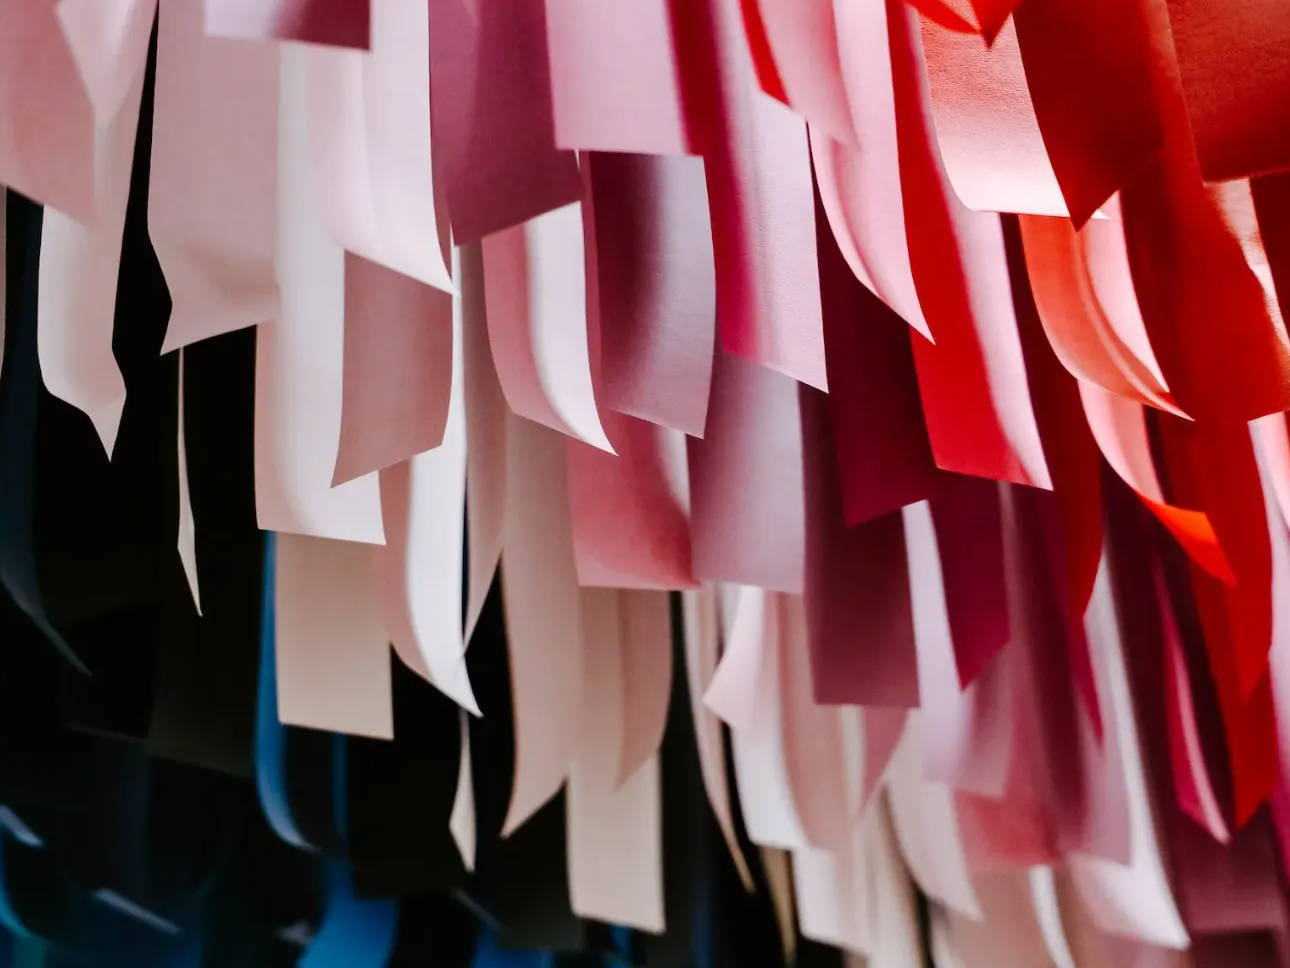 Red, pink, and blue ribbons